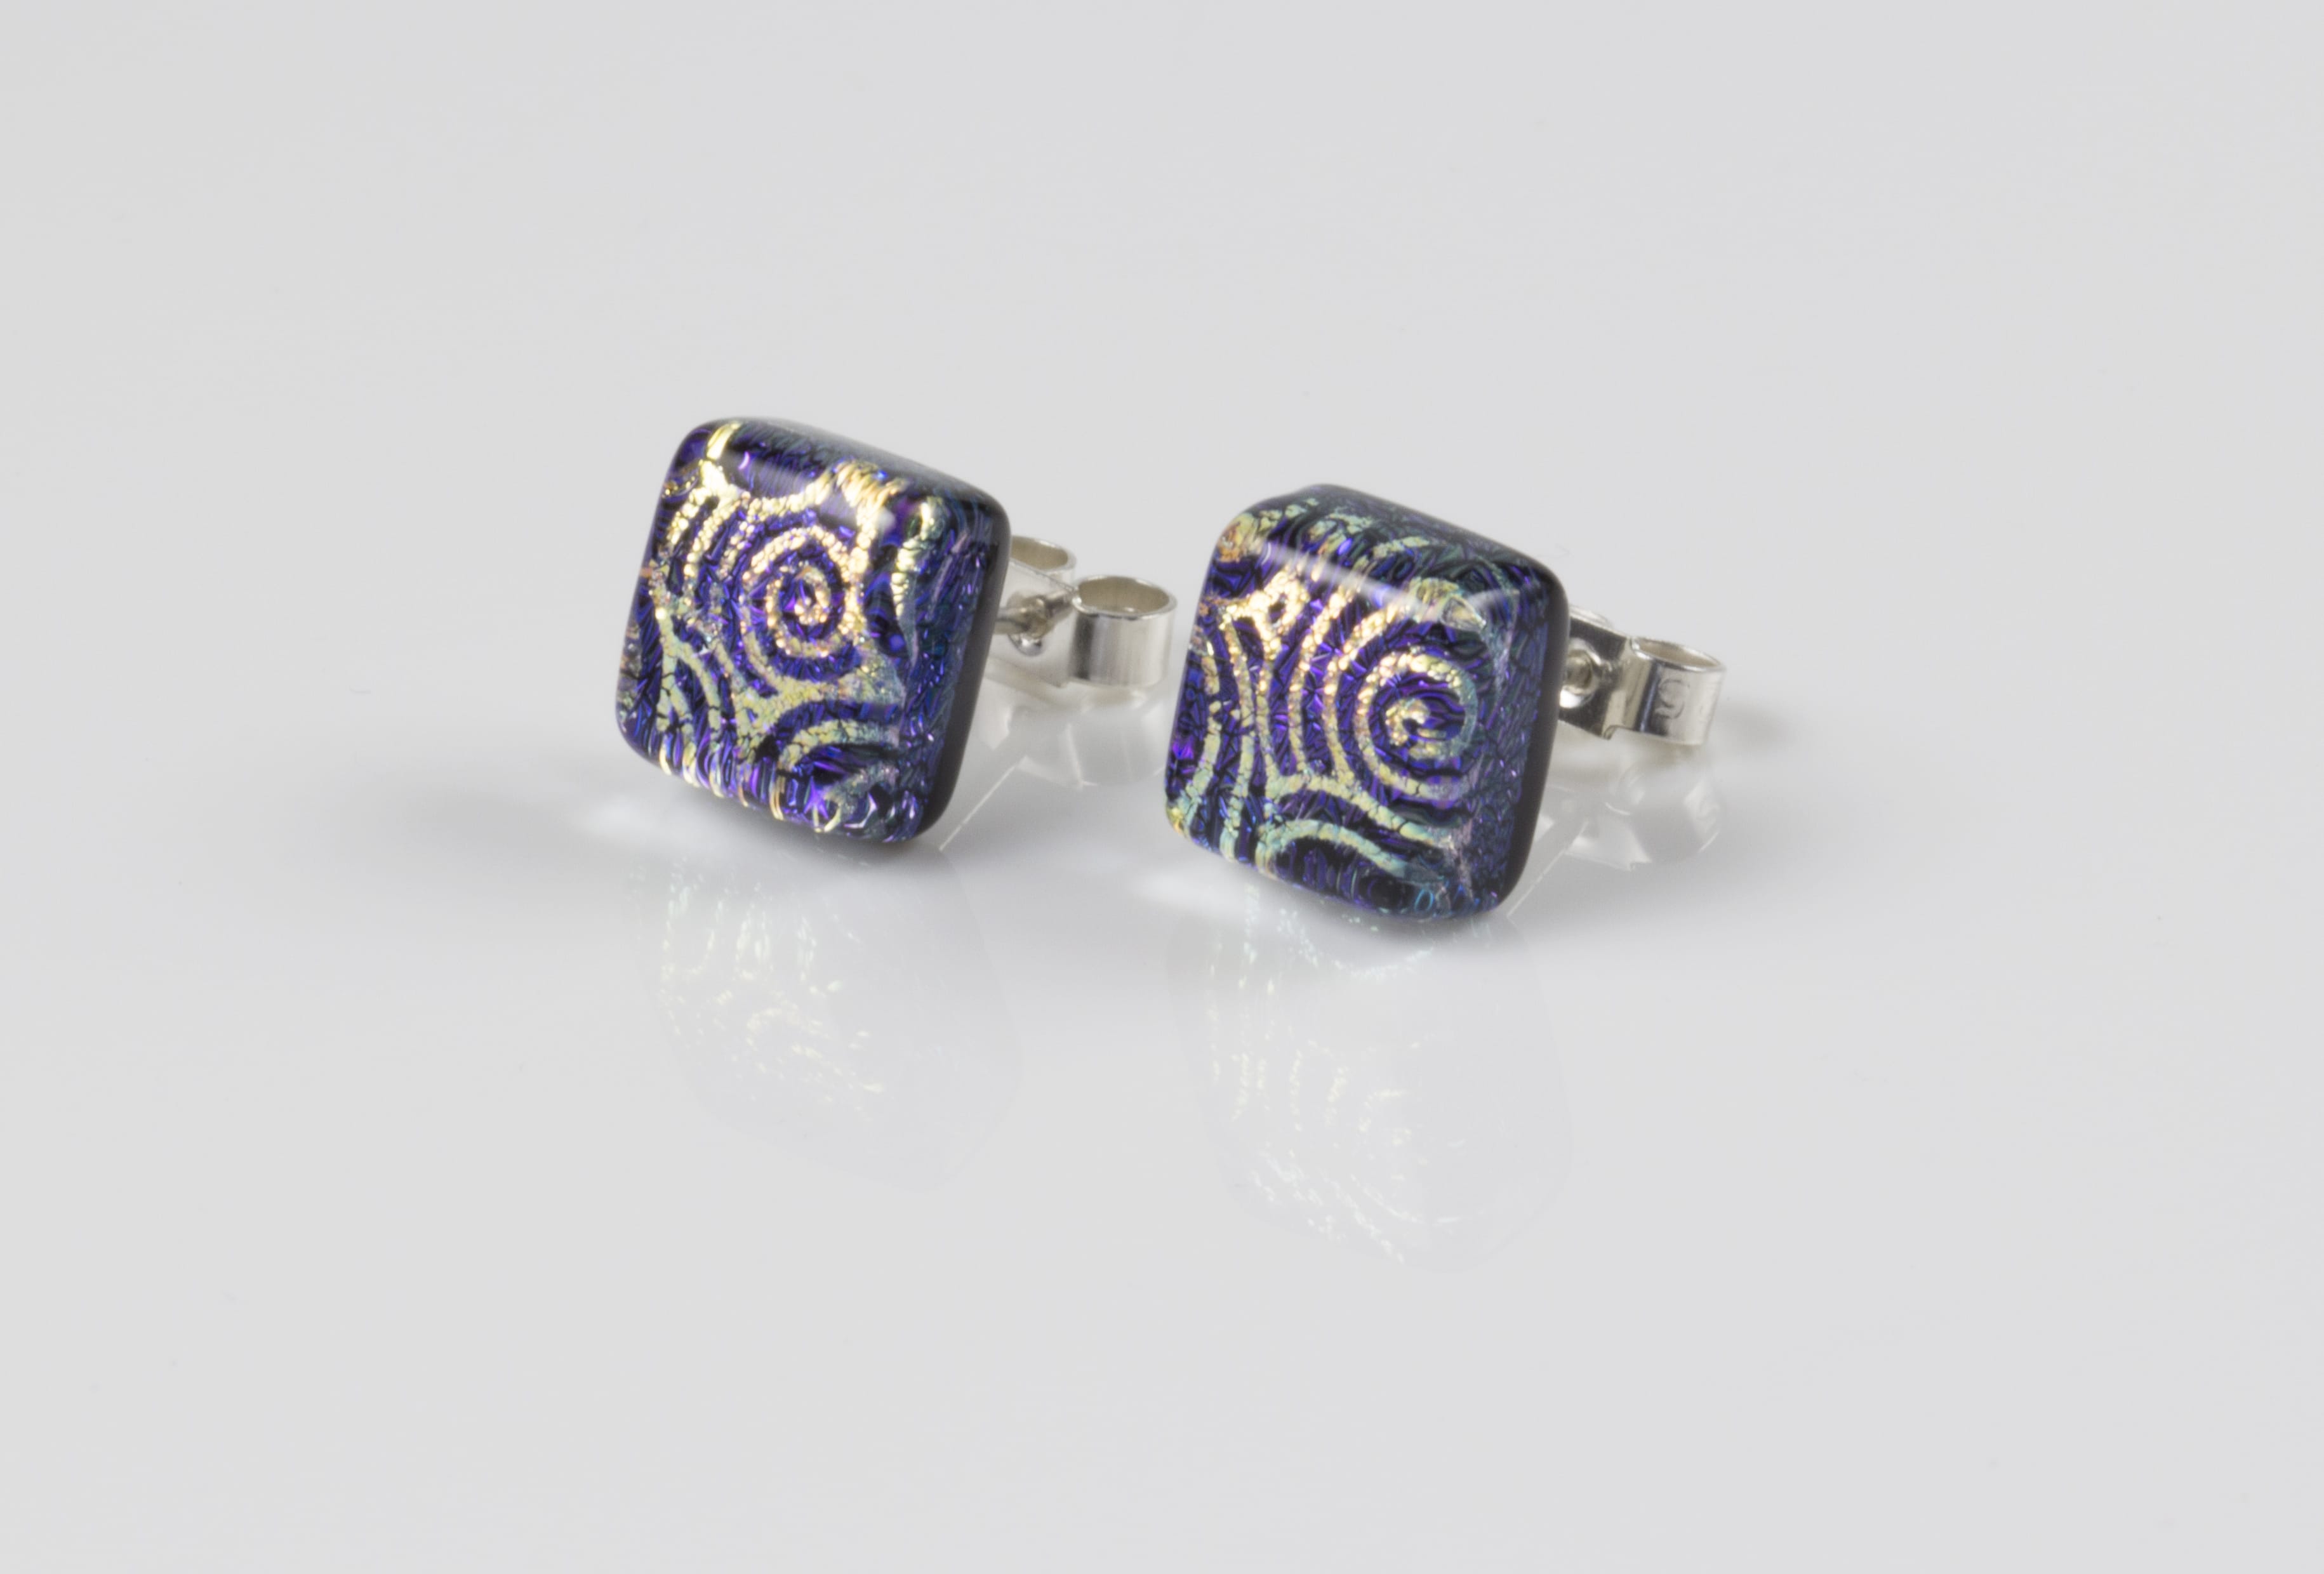 Dichroic glass jewellery uk, handmade stud earrings - purple topped with gold pattern. Square, glass 8-11mm, sterling silver